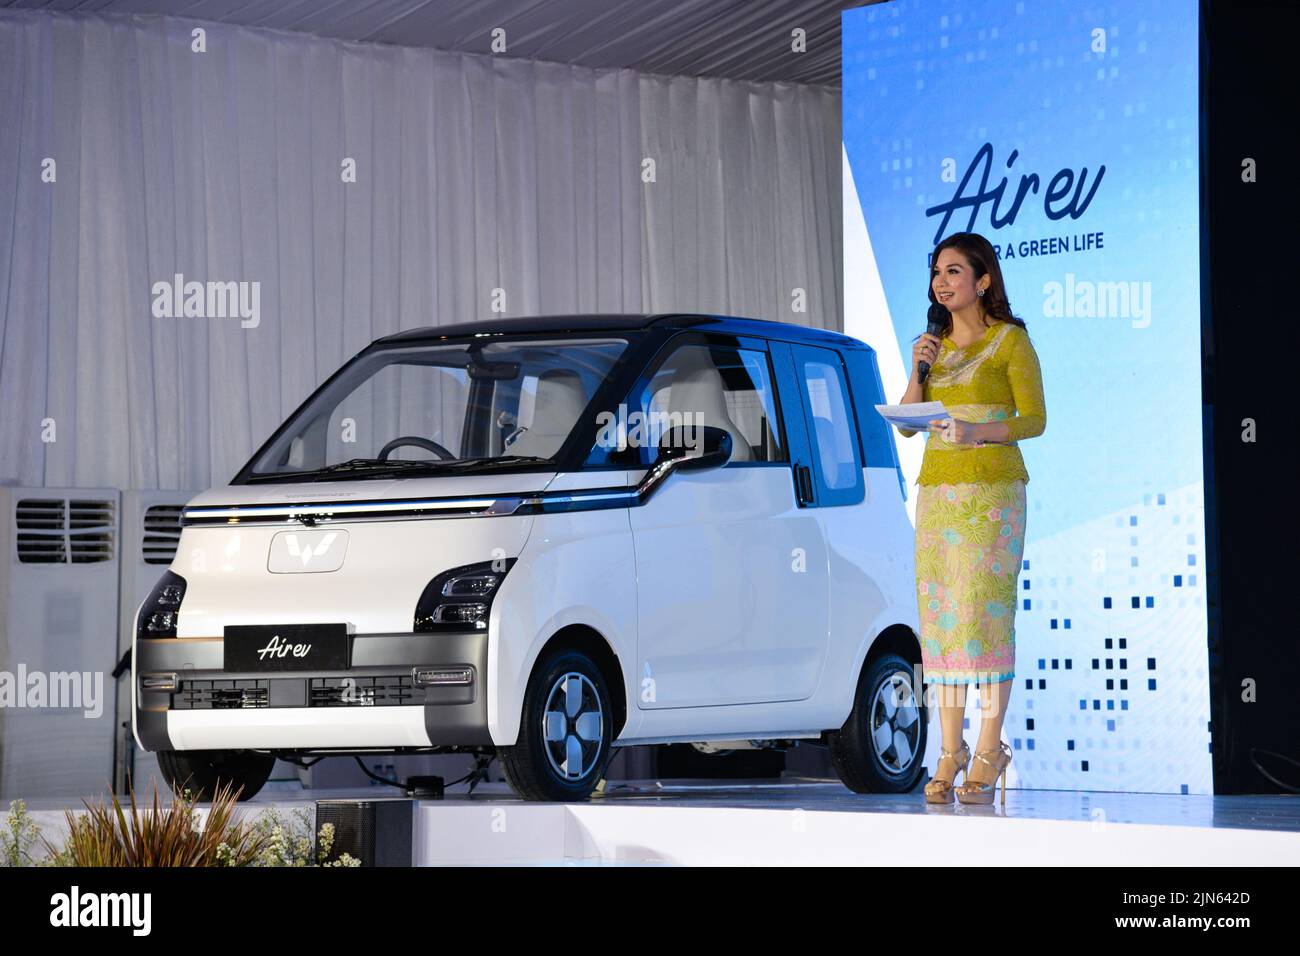 BEKASI, Aug. 9, 2022 (Xinhua) -- A hostess briefs people on Wuling Air EV during the roll-out ceremony at Wuling's production factory in Bekasi, West Java province, Indonesia, Aug. 8, 2022. SAIC-GM-Wuling (SGMW), a major Chinese automobile manufacturer, through its local unit SGMW Motor Indonesia (Wuling), on Monday launched here its production of the electric vehicle in Indonesia, named Wuling Air EV. (Xinhua/Xu Qin) Stock Photo